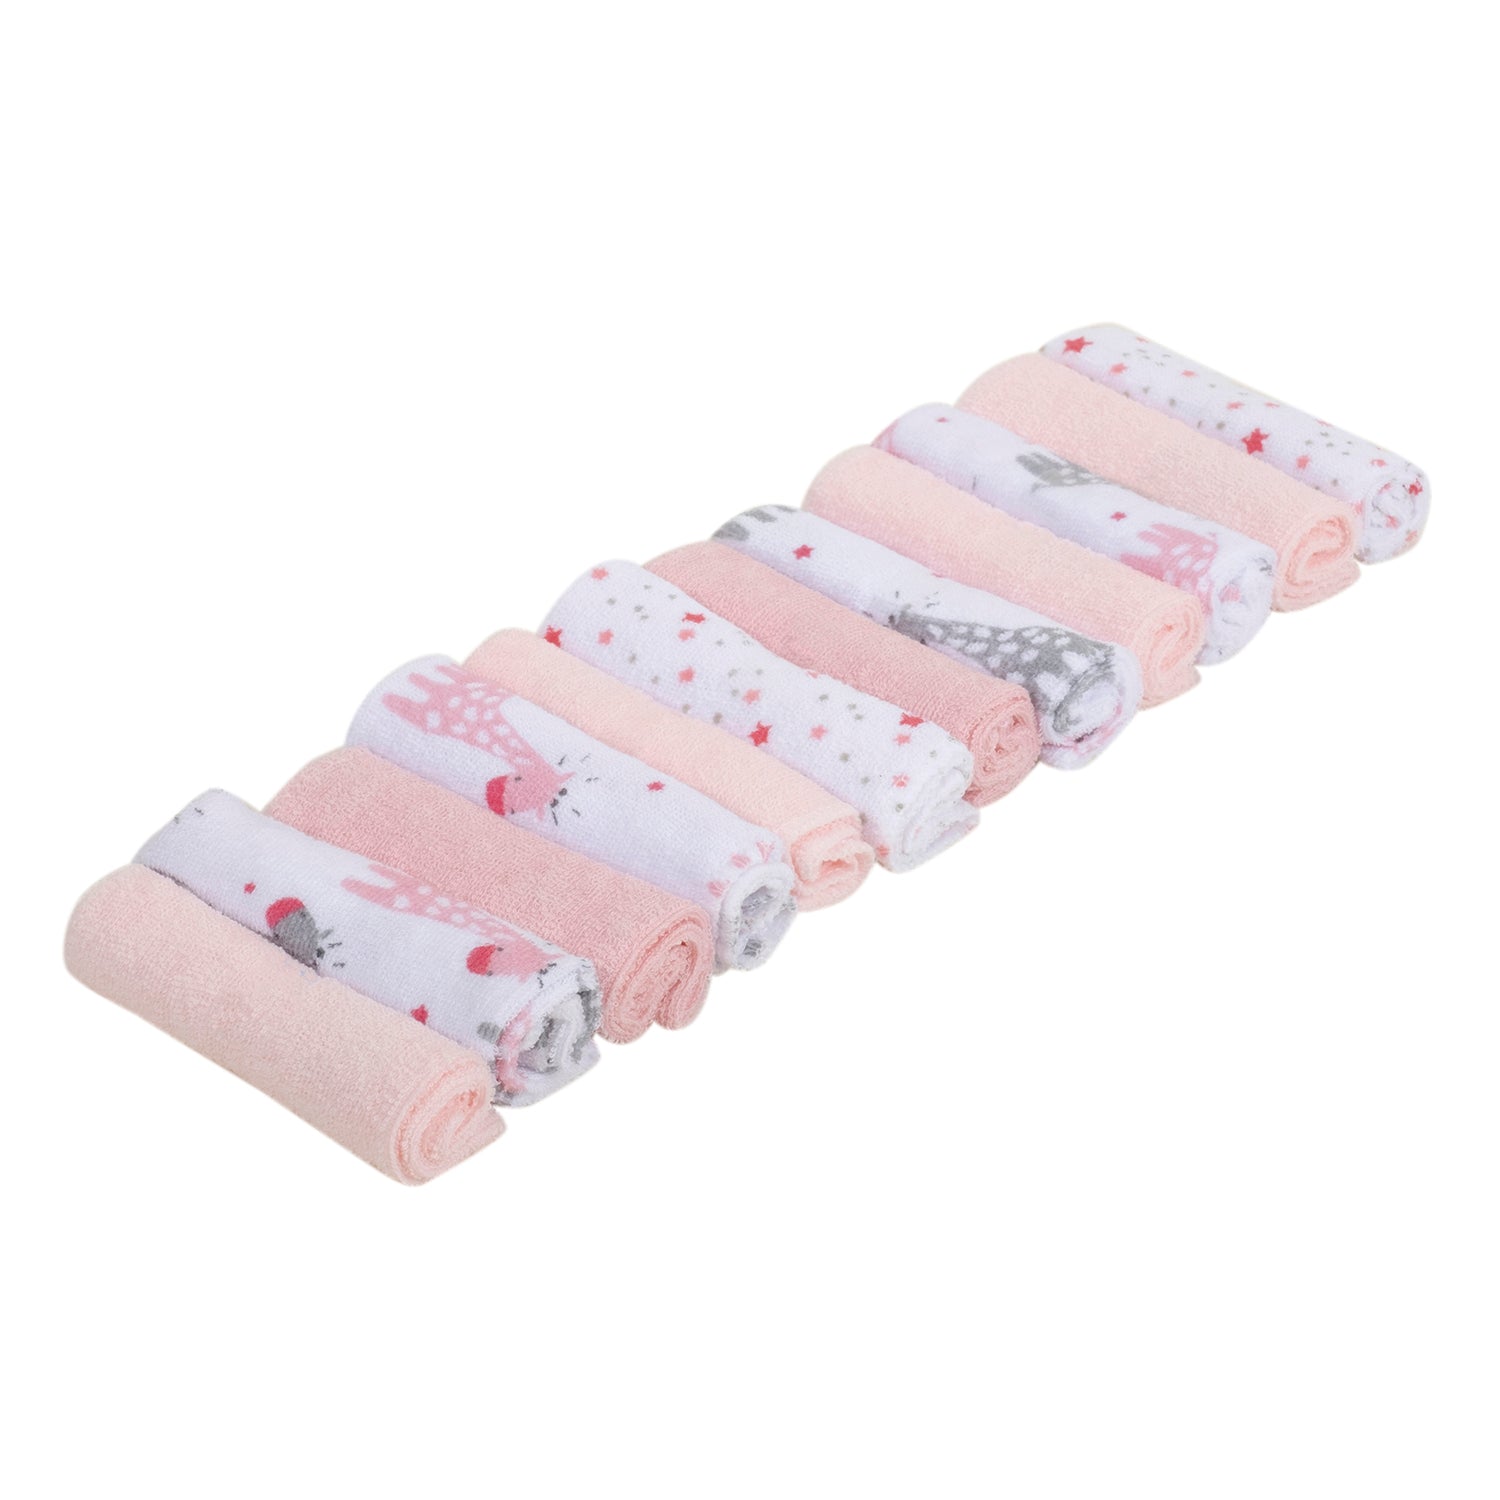 Baby Moo Star And Giraffe Soft And Absorbent Handkerchief Napkins For Infant Face And Body Pack Of 12 Wash Cloth - Pink